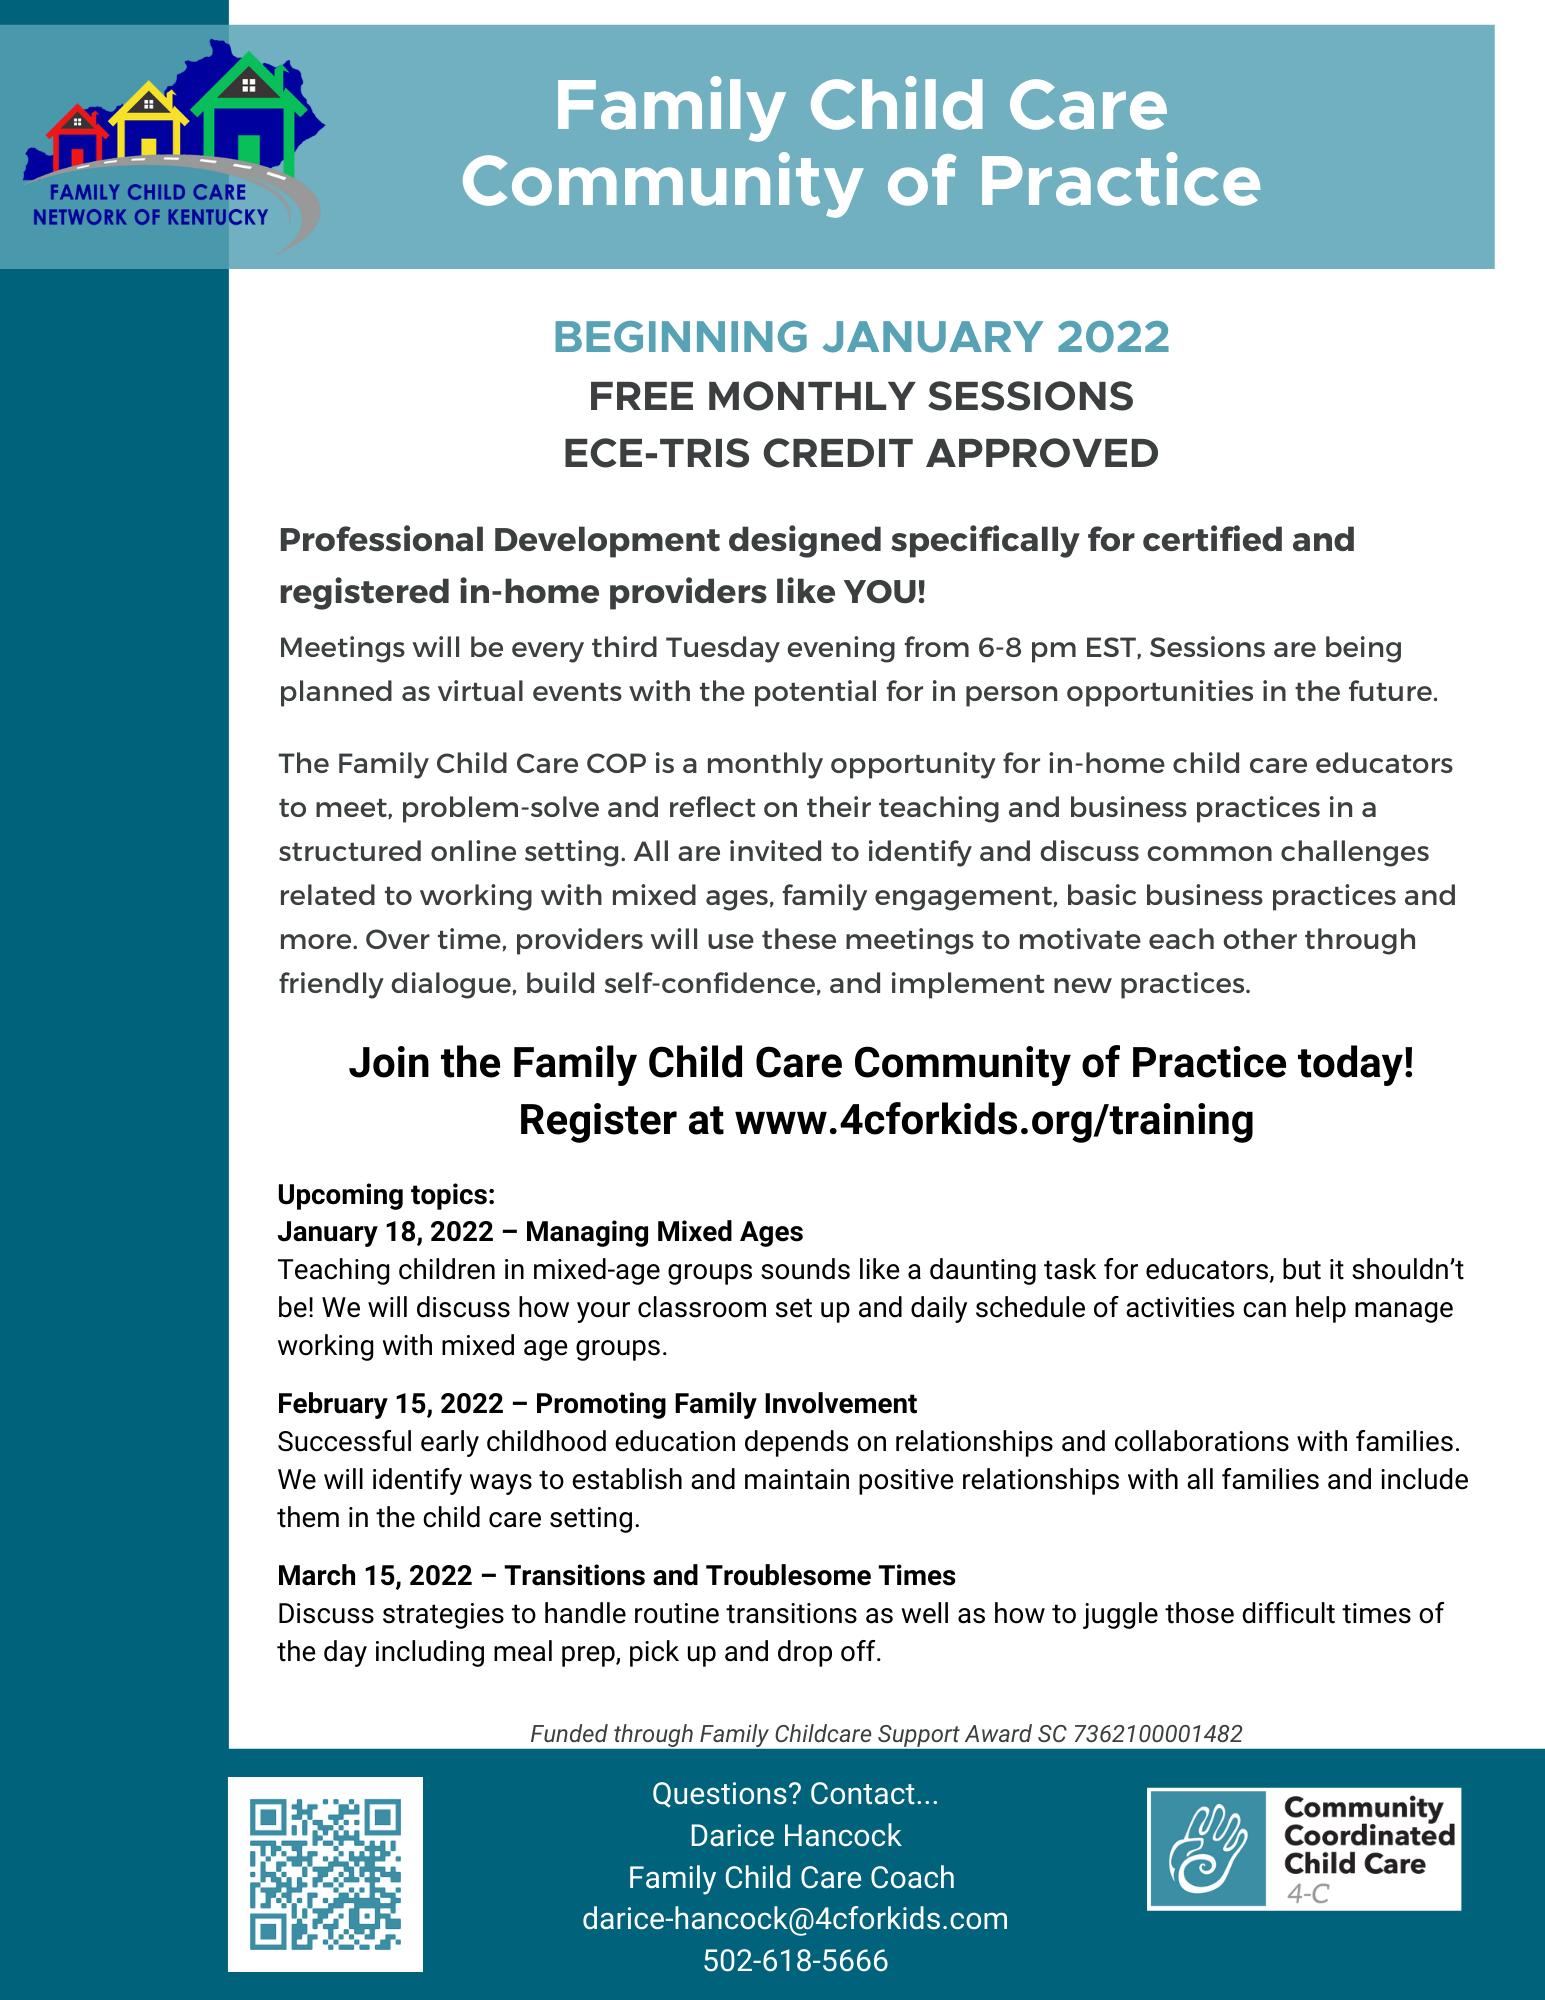 Download a printable flyer for the Family Child Care Community of Practice.